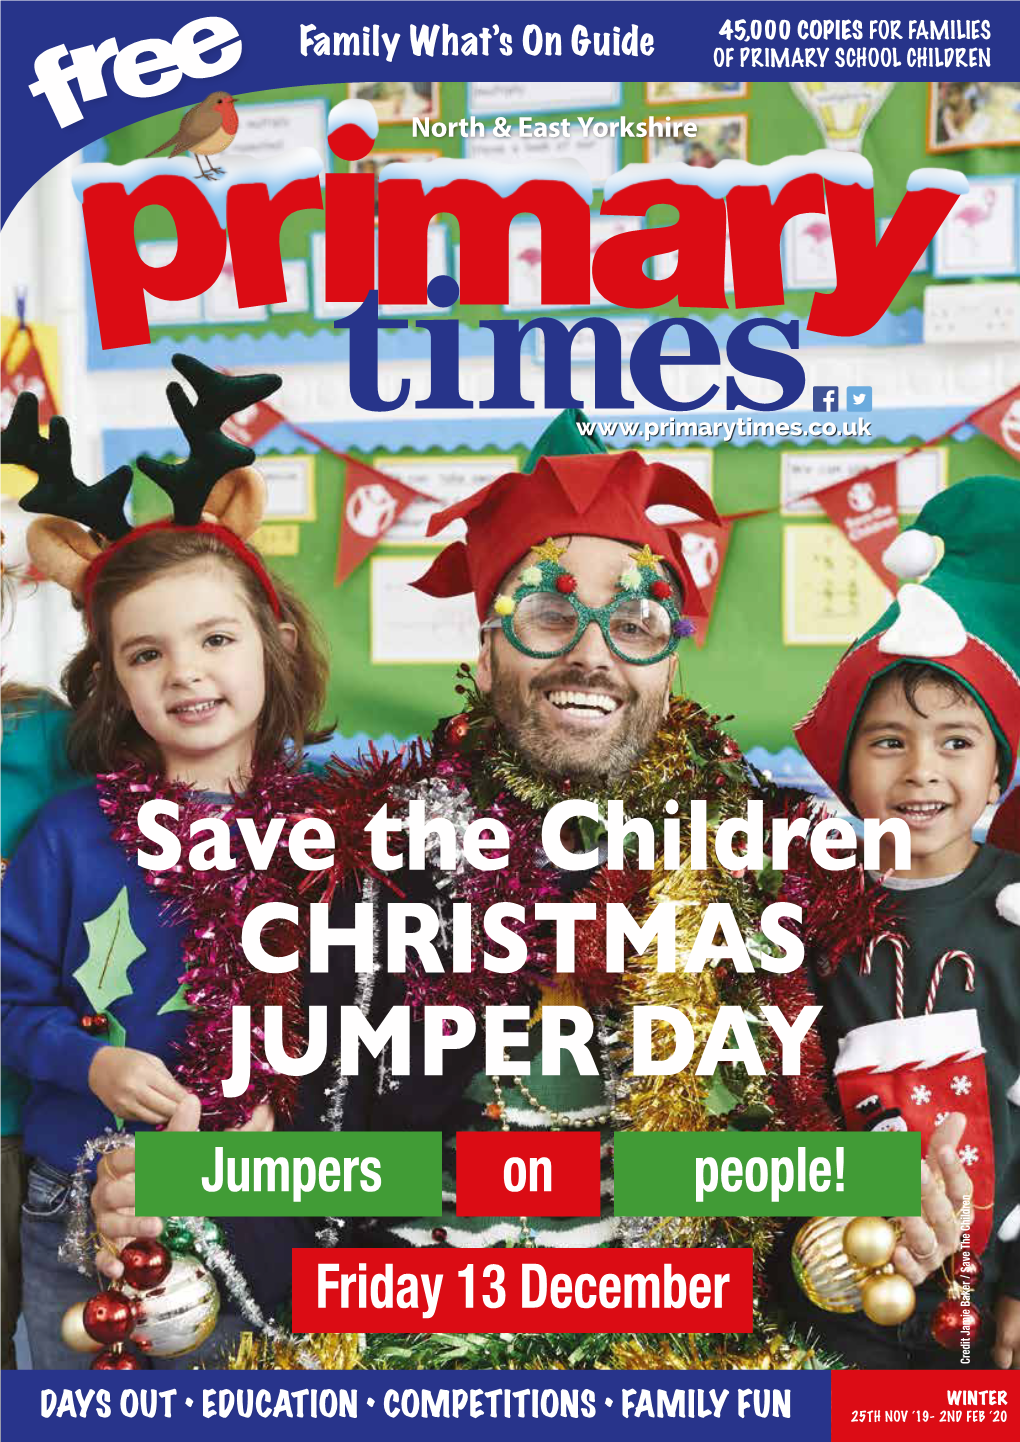 Save the Children CHRISTMAS JUMPER DAY Jumpers on People! Friday 13 December Credit Jamie Baker / Save the Children Credit Jamie Baker / Save